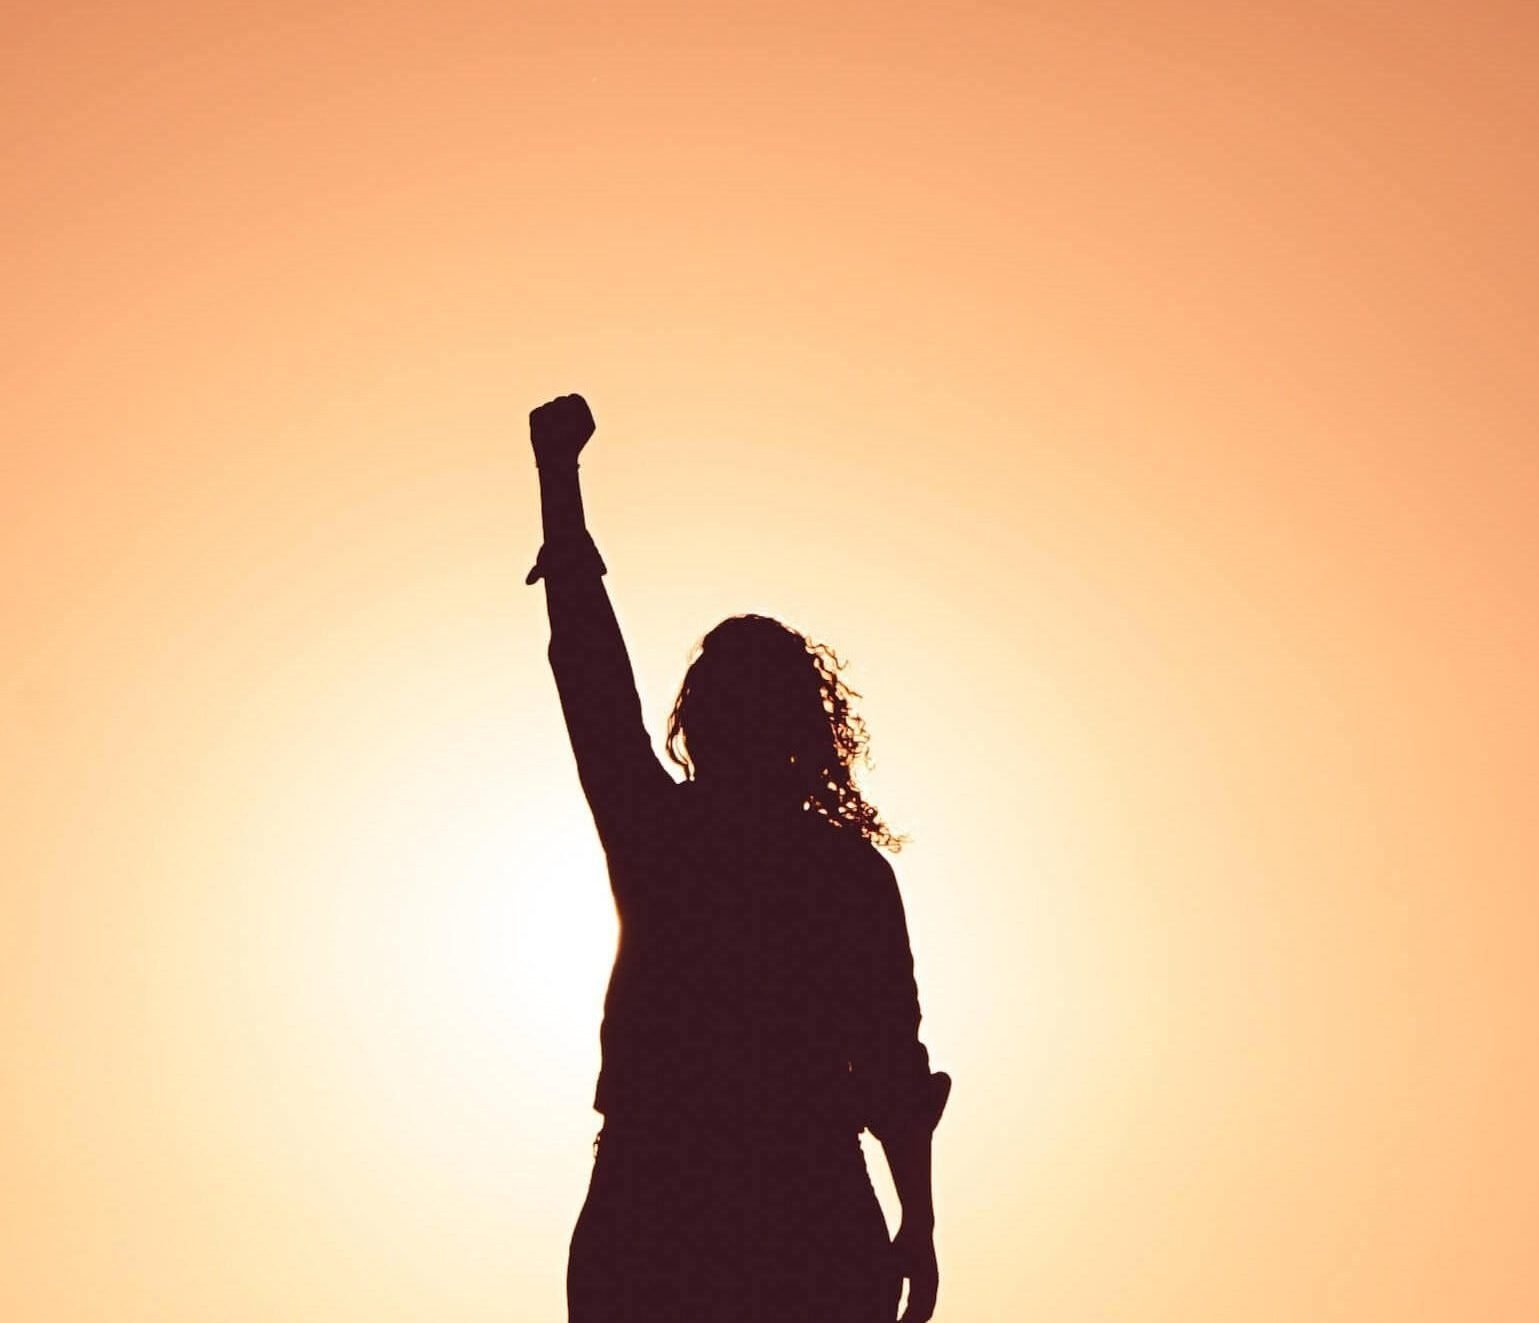 silhouette of woman putting fist in the air at sunset as she overcomes the thought of "I don't know what to do with my life"